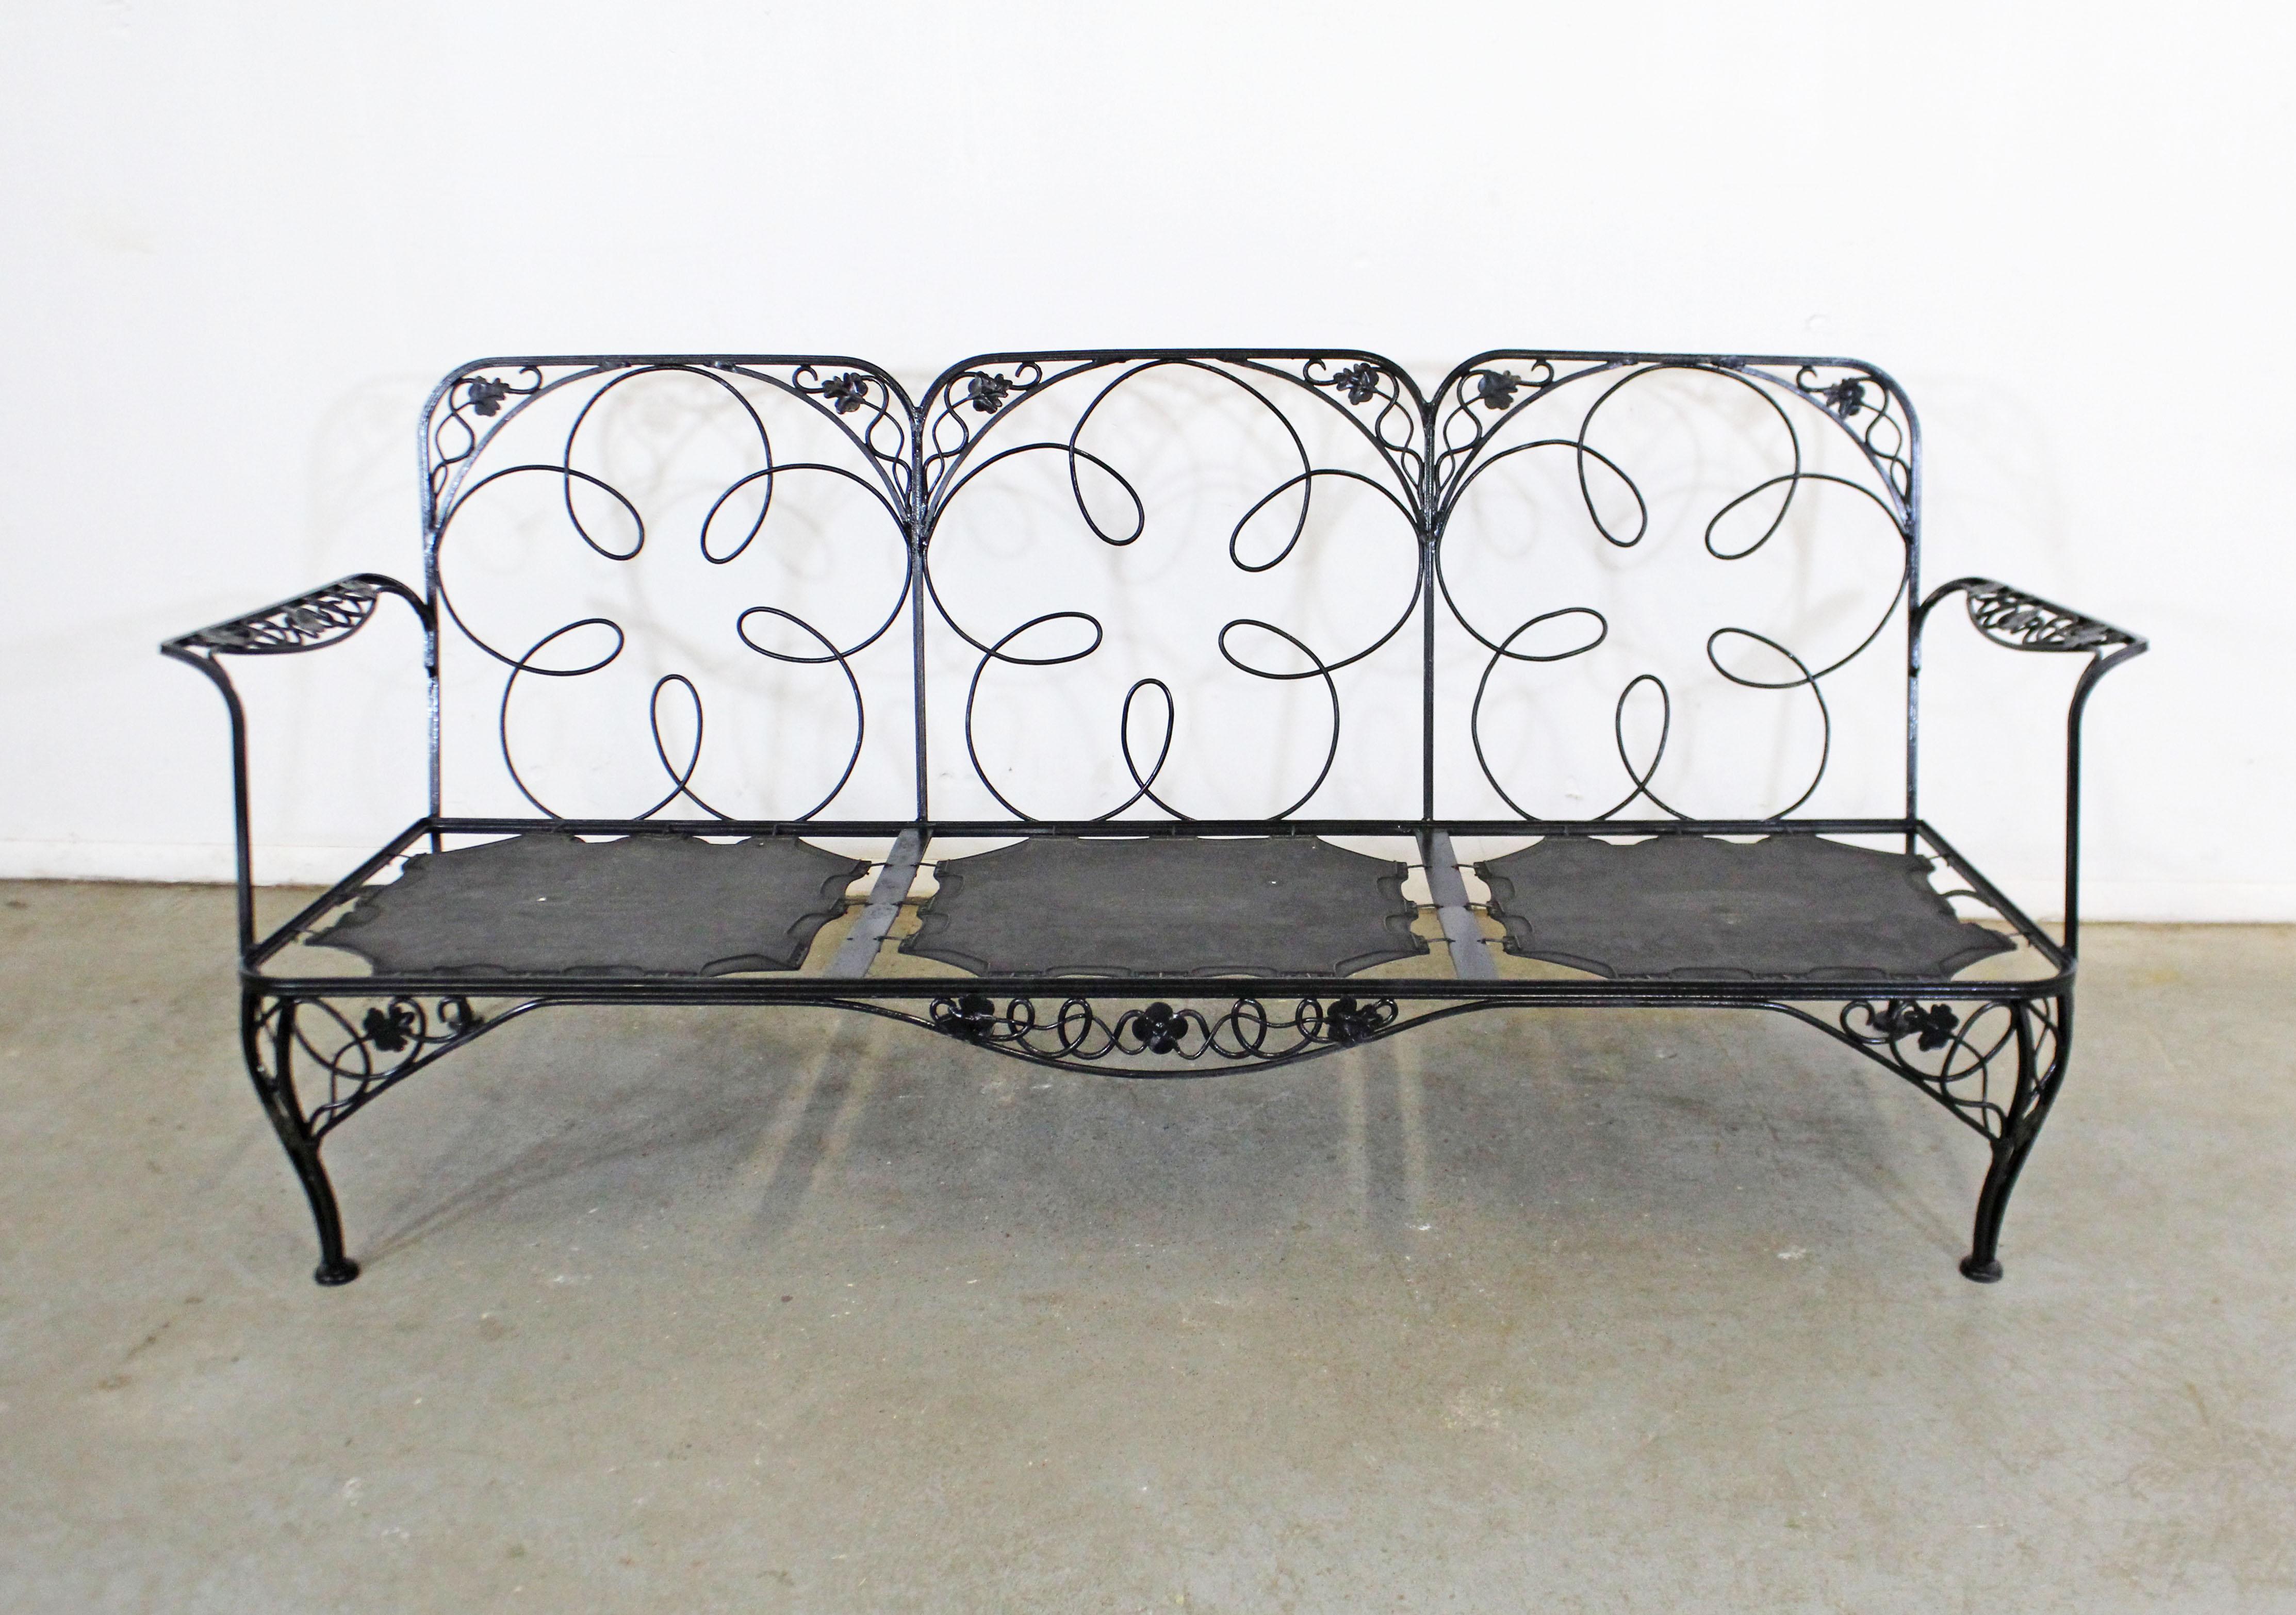 What a find. Offered is a vintage wrought iron sofa frame with a beautiful floral/leaf design. Perfect for an outdoor patio space! It is in good condition, has been repainted, but does not include cushions. It is structurally sound. Seats are marked